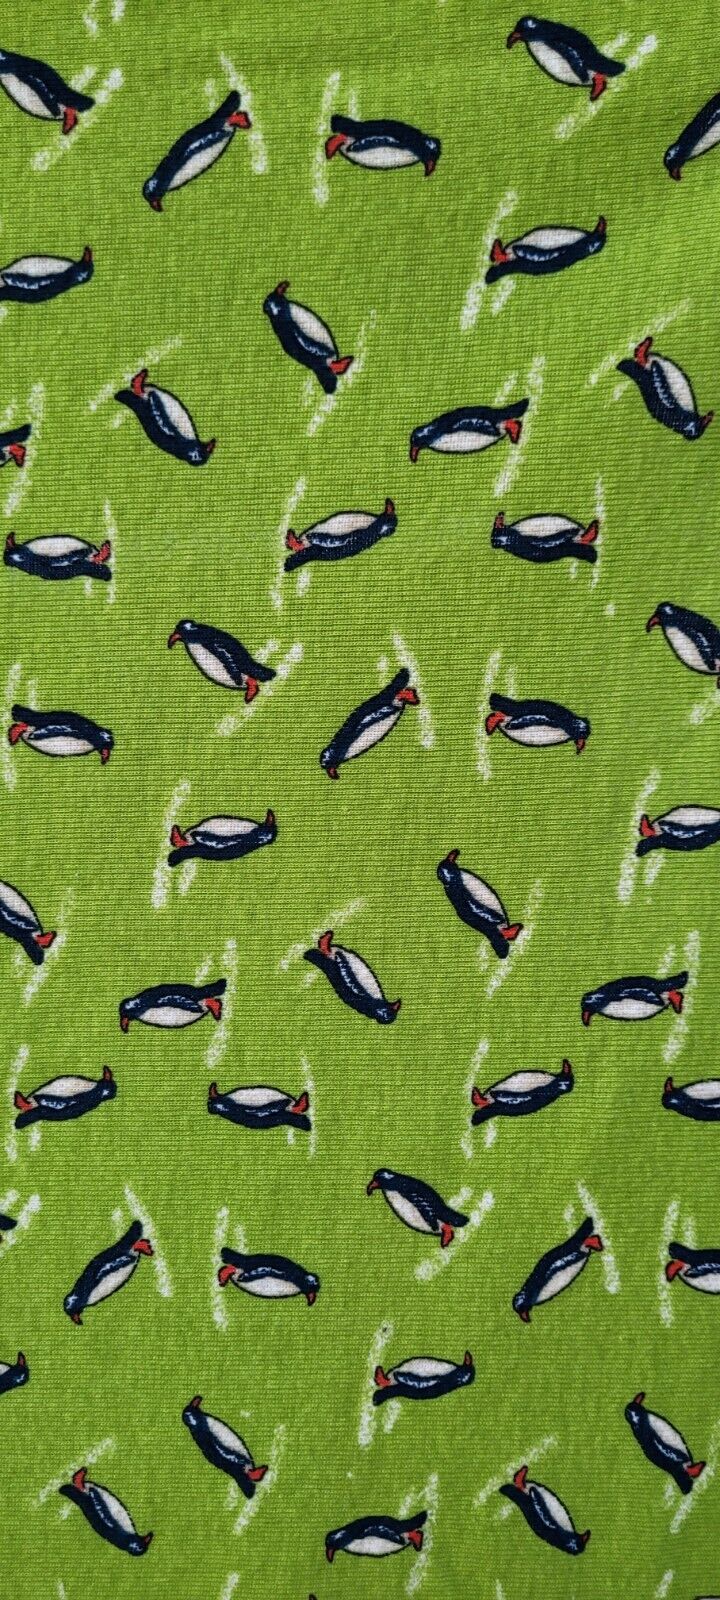 Vintage Lime Green Cotton Knit Fabric With PENGUINS